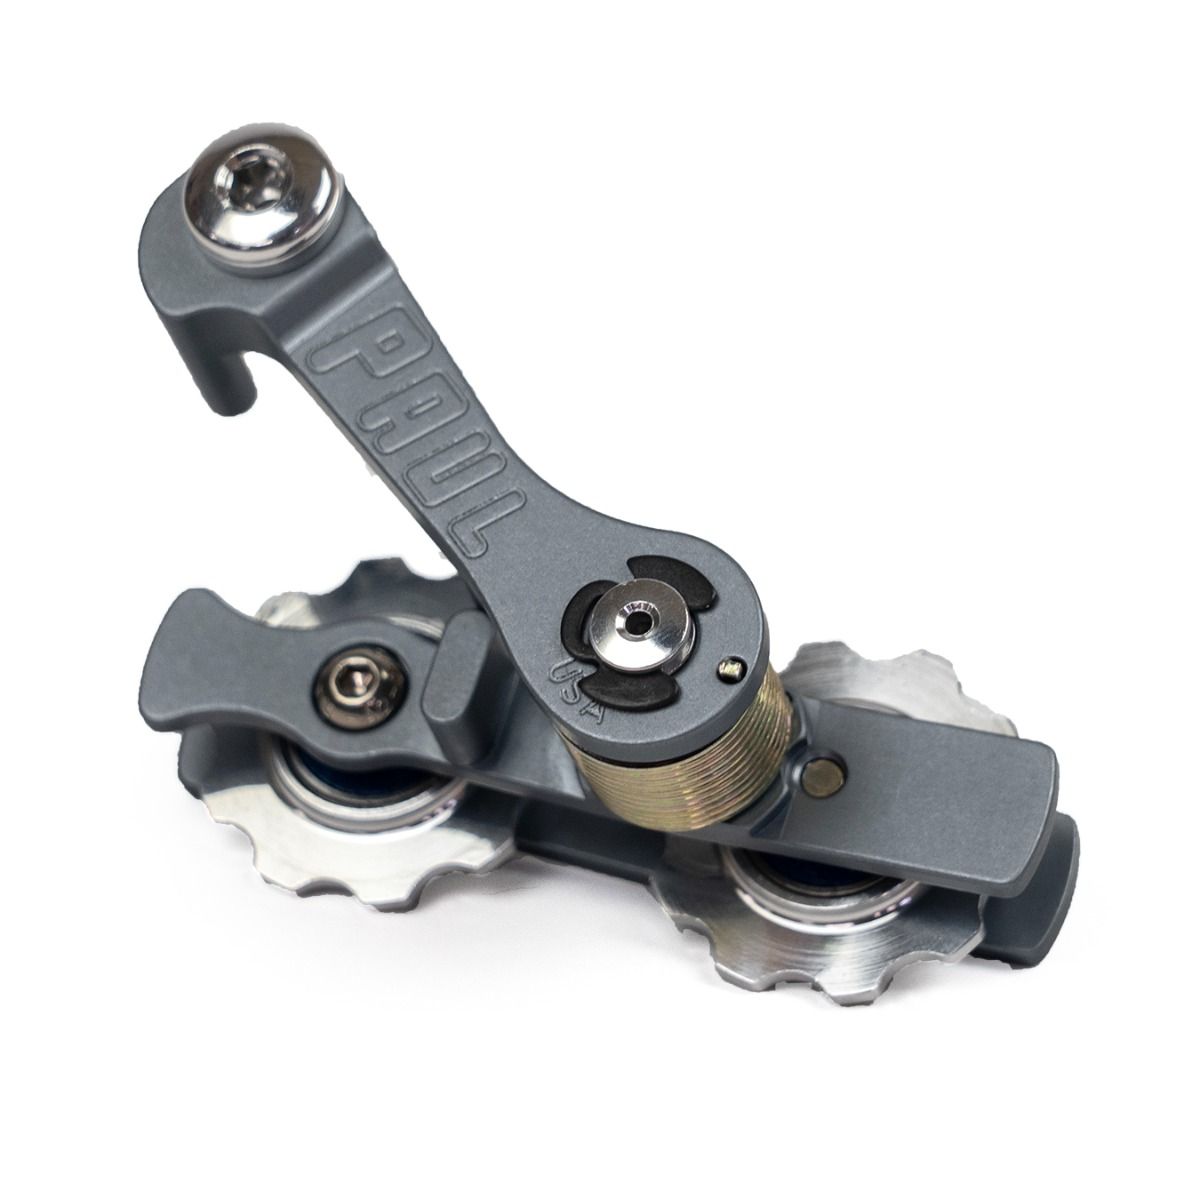 *PAUL* melvin chain tensioner (pewter)